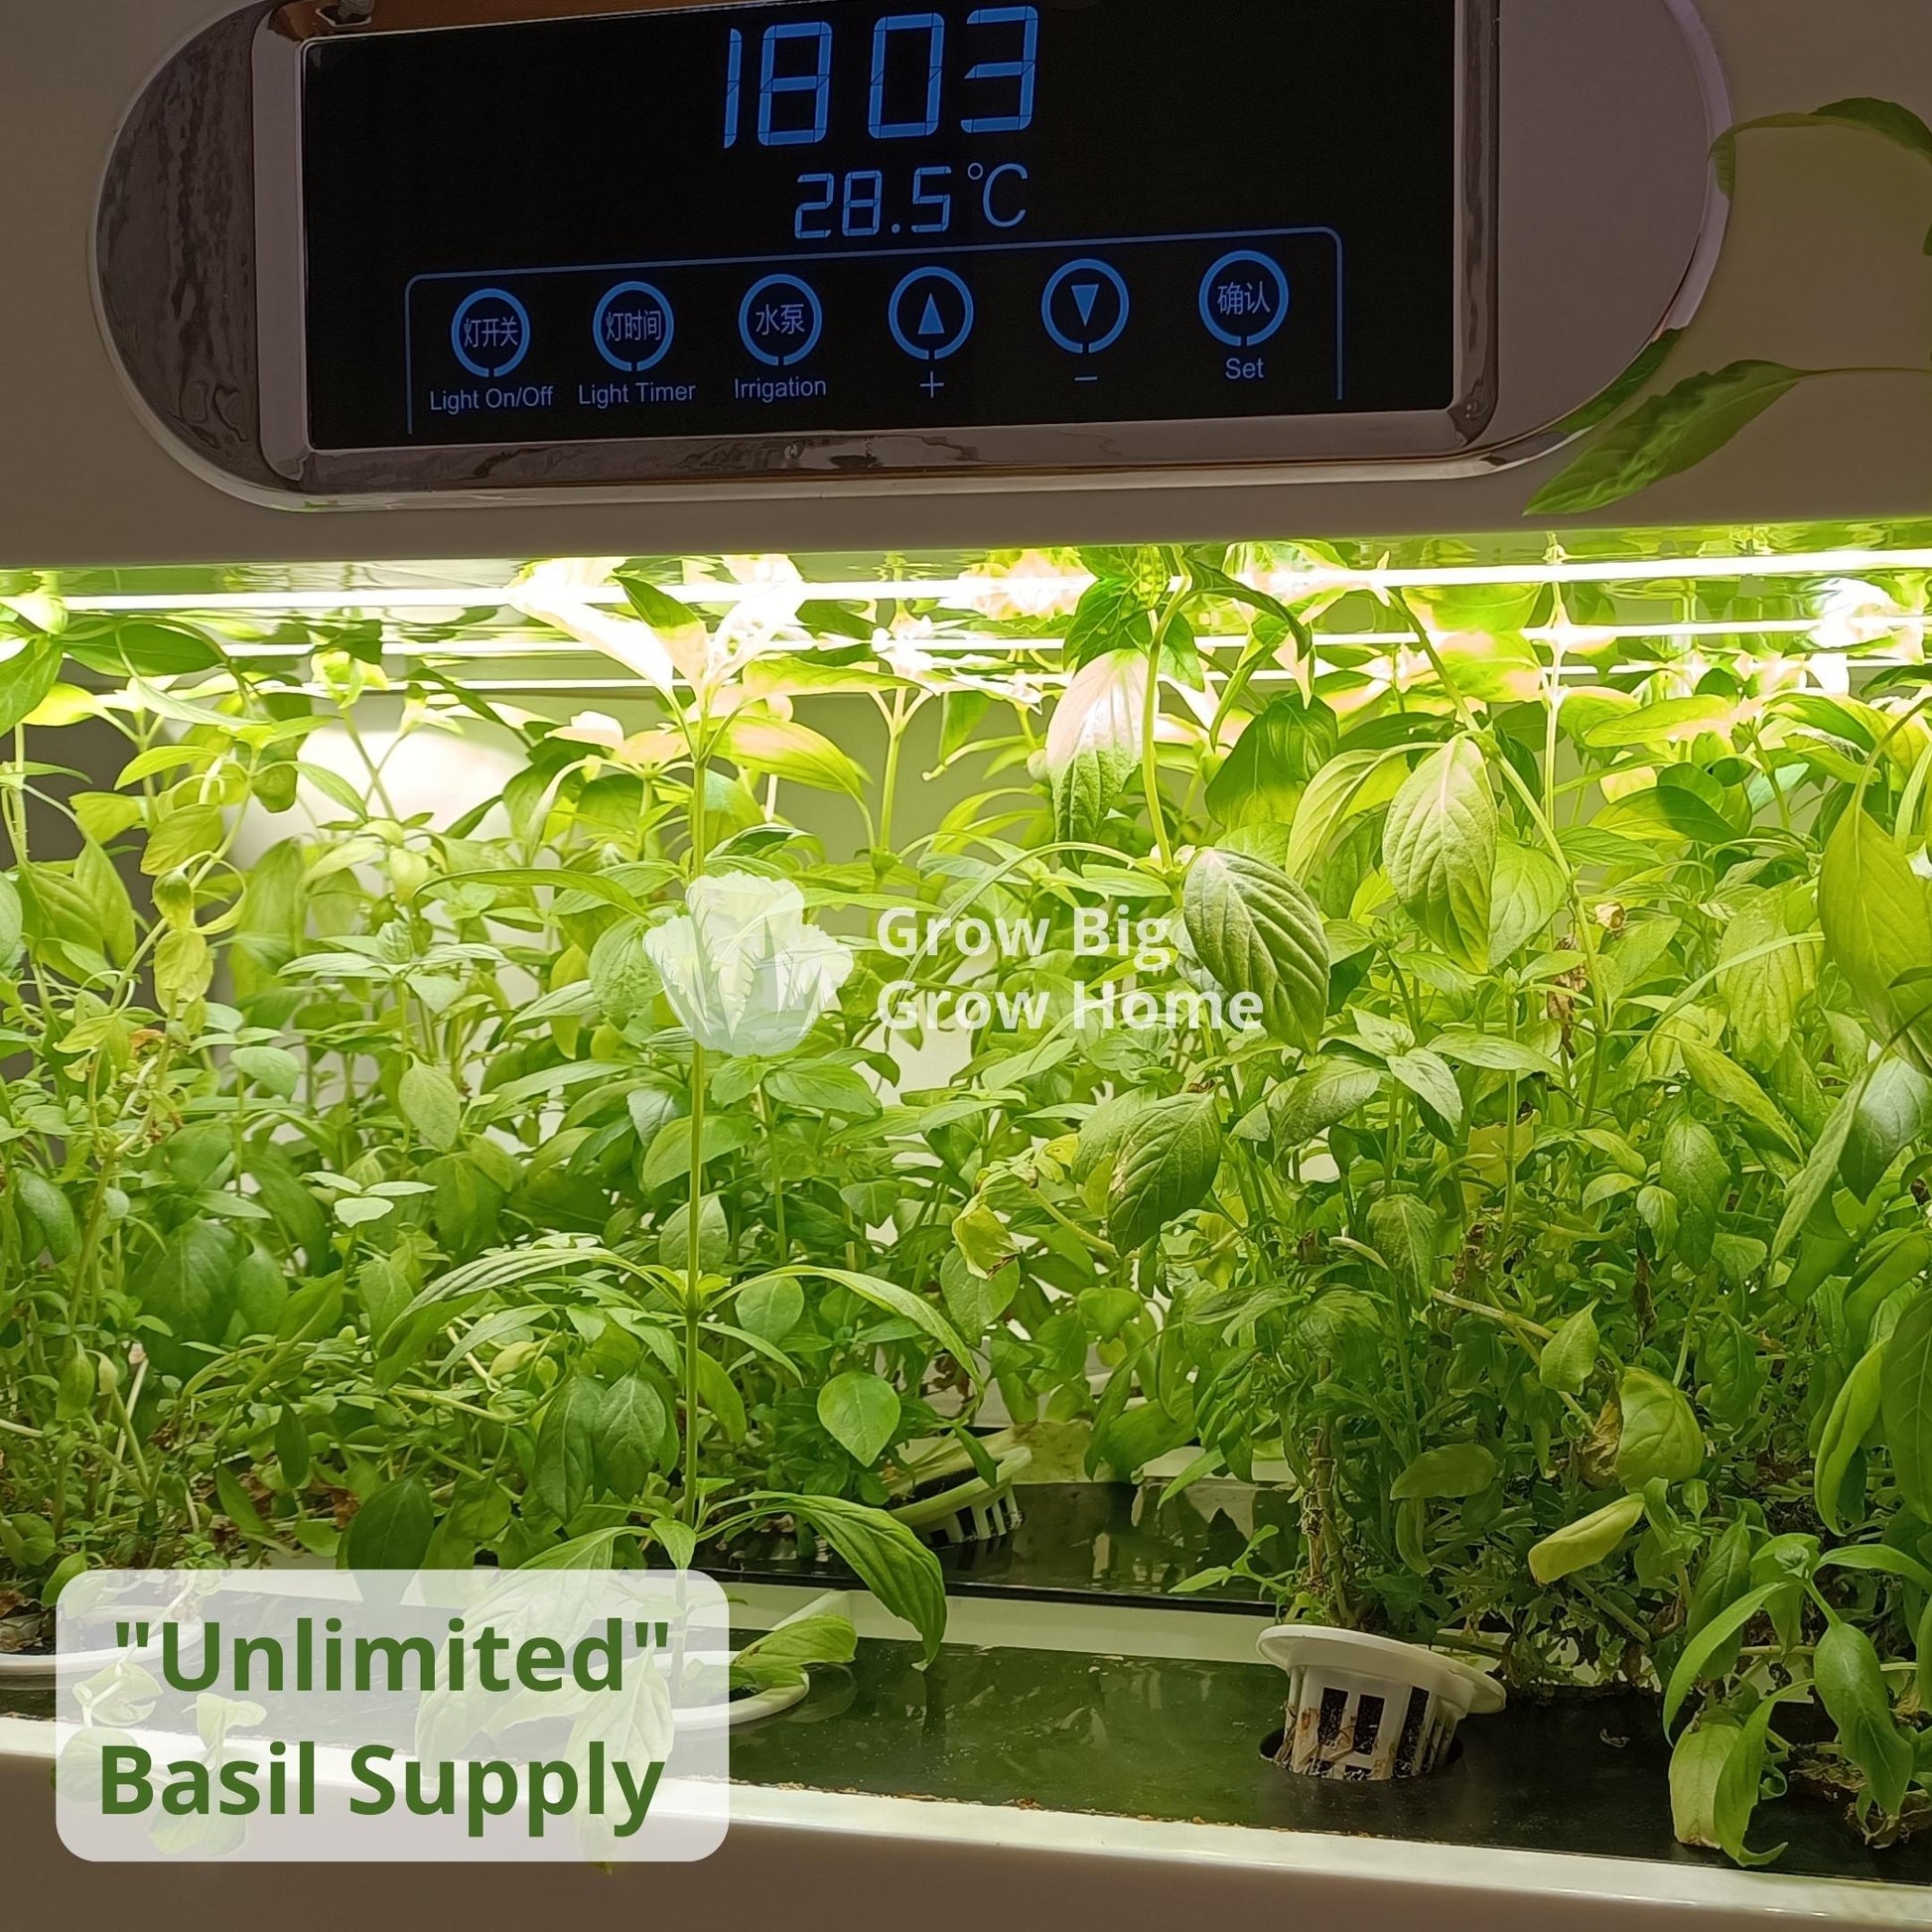 Harvest an unlimited amount of basil with hydroponics vegetable grower